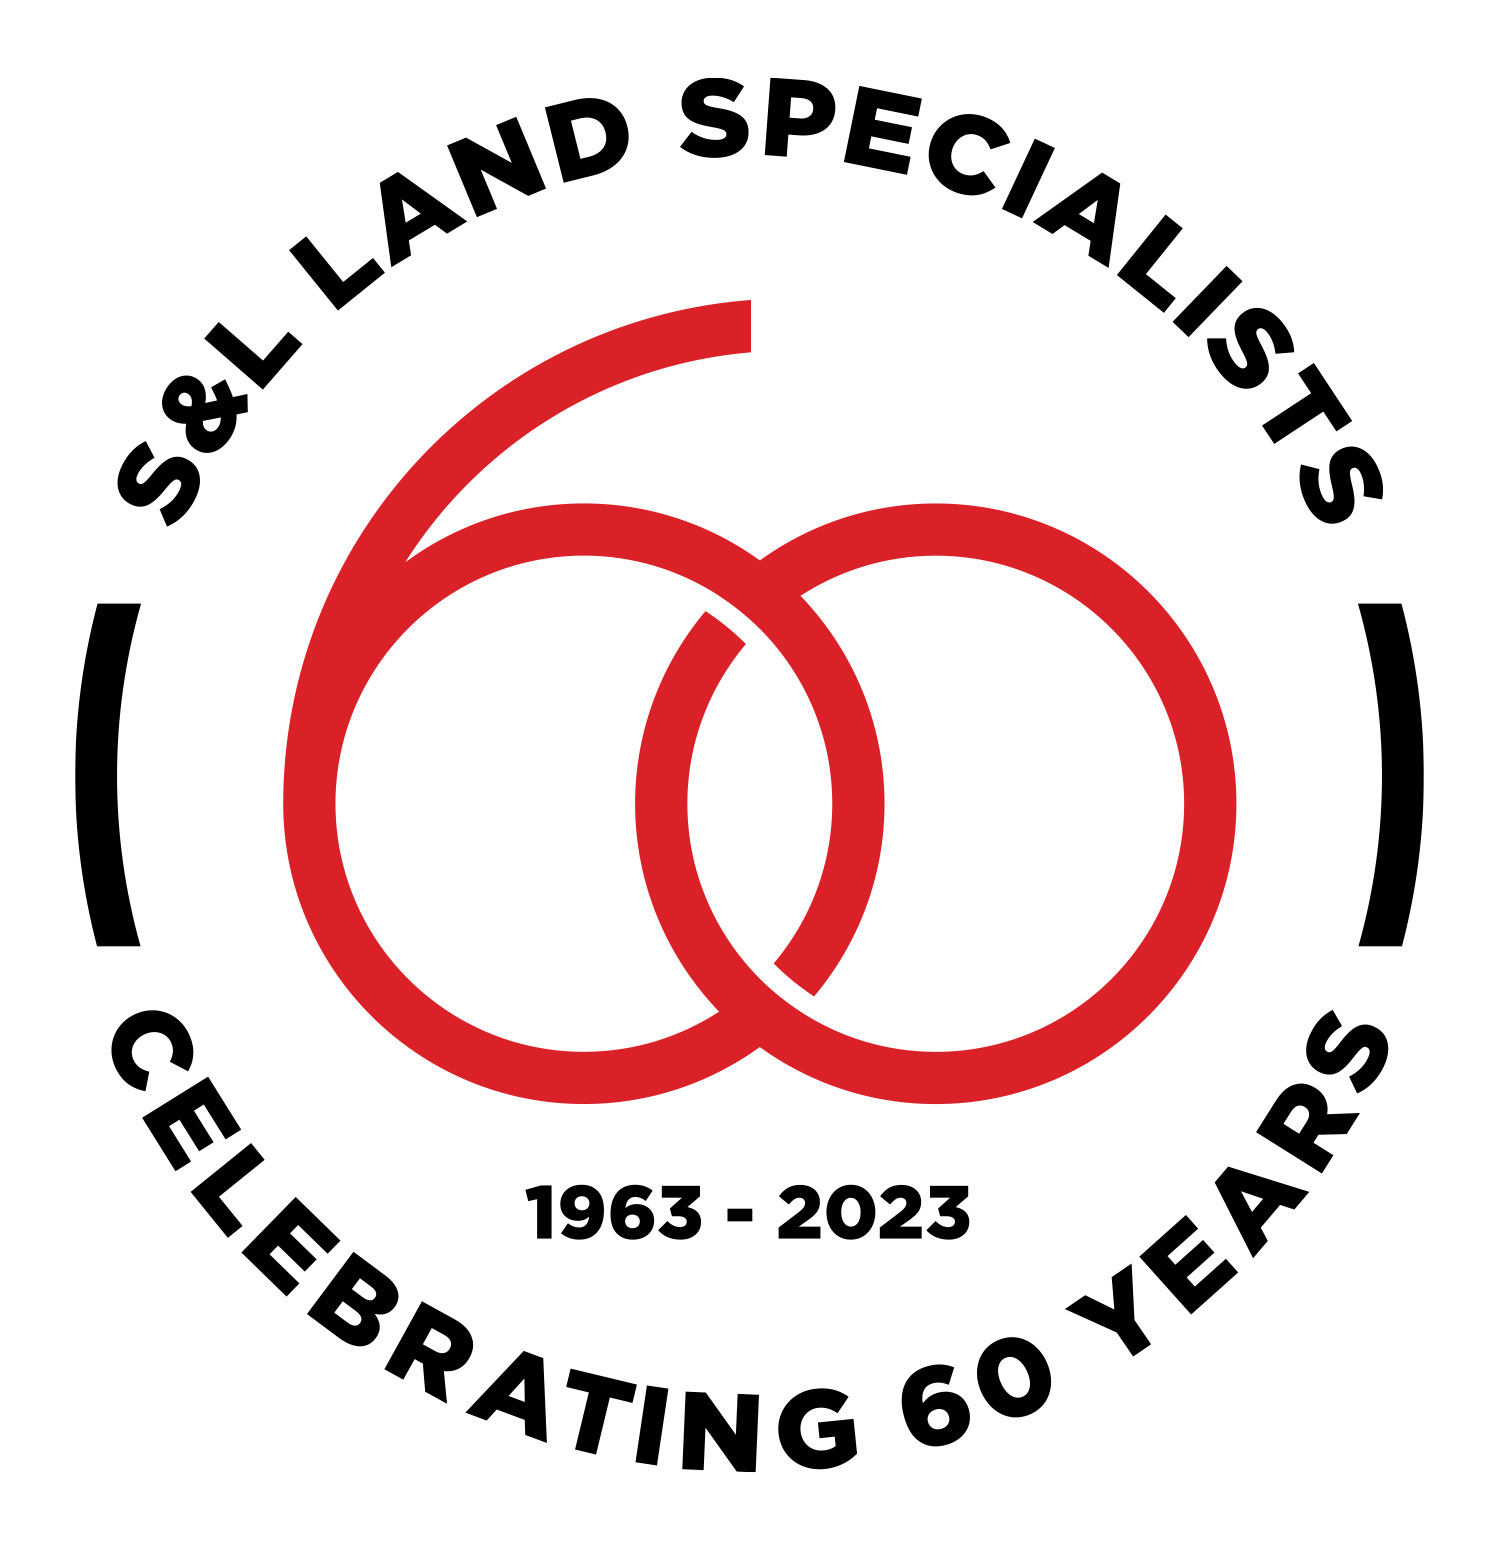 S&L Land Specialists celebrate 60 years in Downtown Tauranga